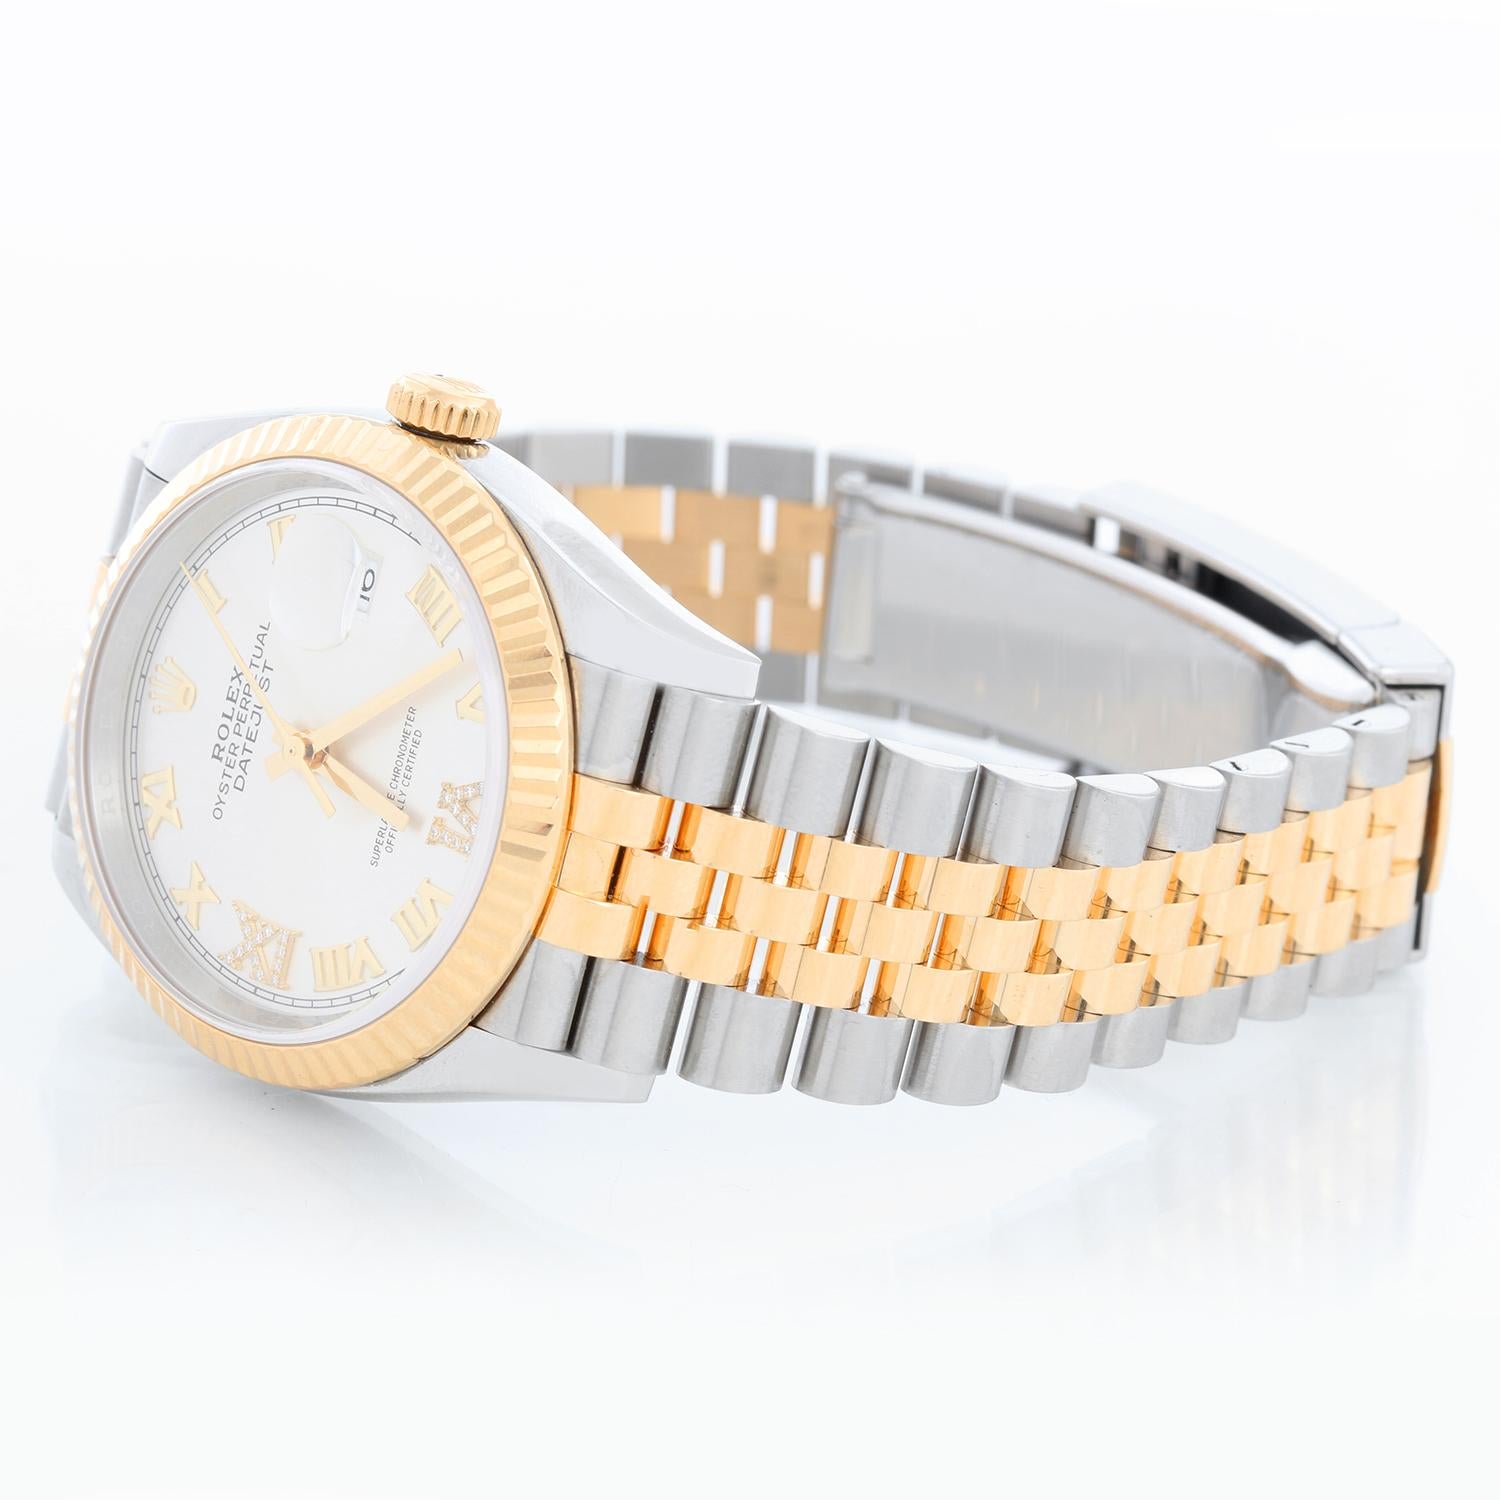 Rolex Datejust Men's 2-Tone 126233 Watch - Automatic winding, 31 jewels, Quickset, sapphire crystal. Stainless steel case with 18k yellow gold fluted bezel ( 36 mm ) . Silver dial with diamond 6 and 9 o'clock. Stainless steel and 18k yellow gold